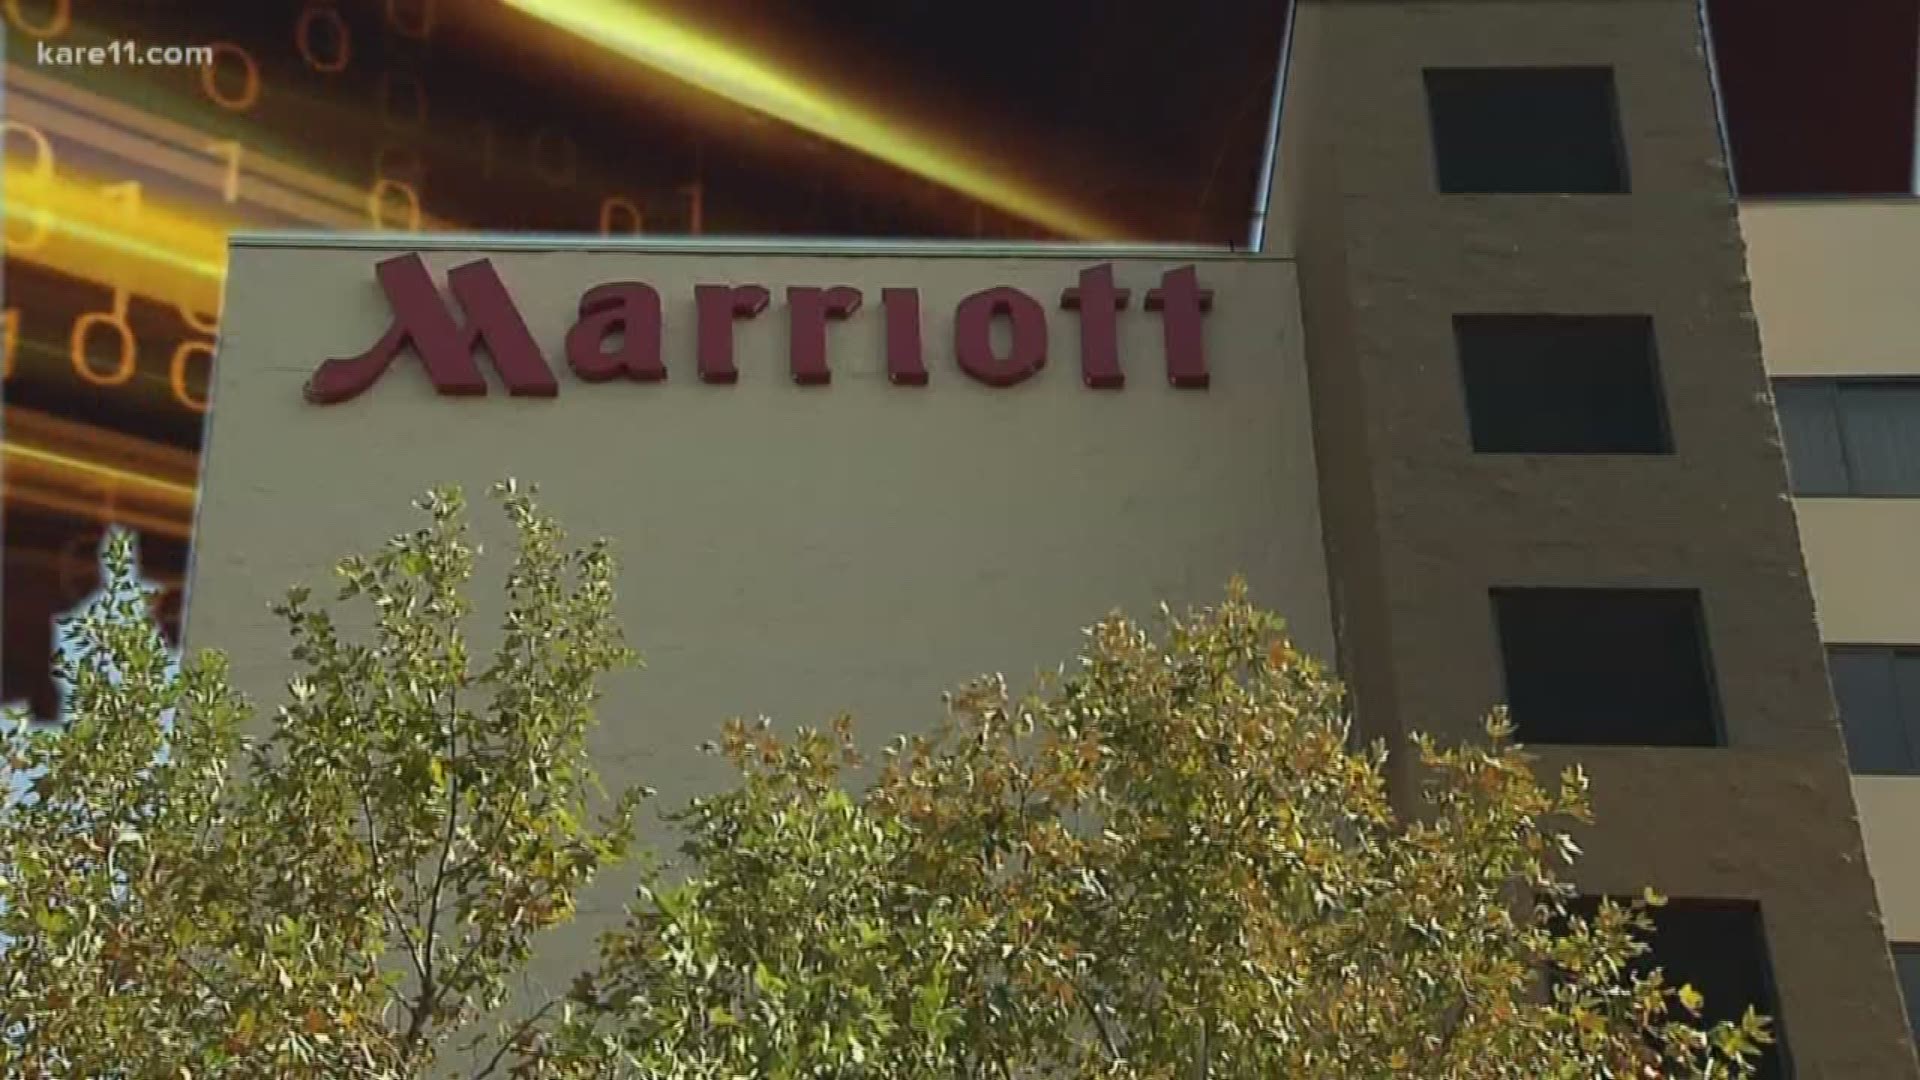 It's the second largest data breach in history. at least 500 million people hacked from a Marriott database.